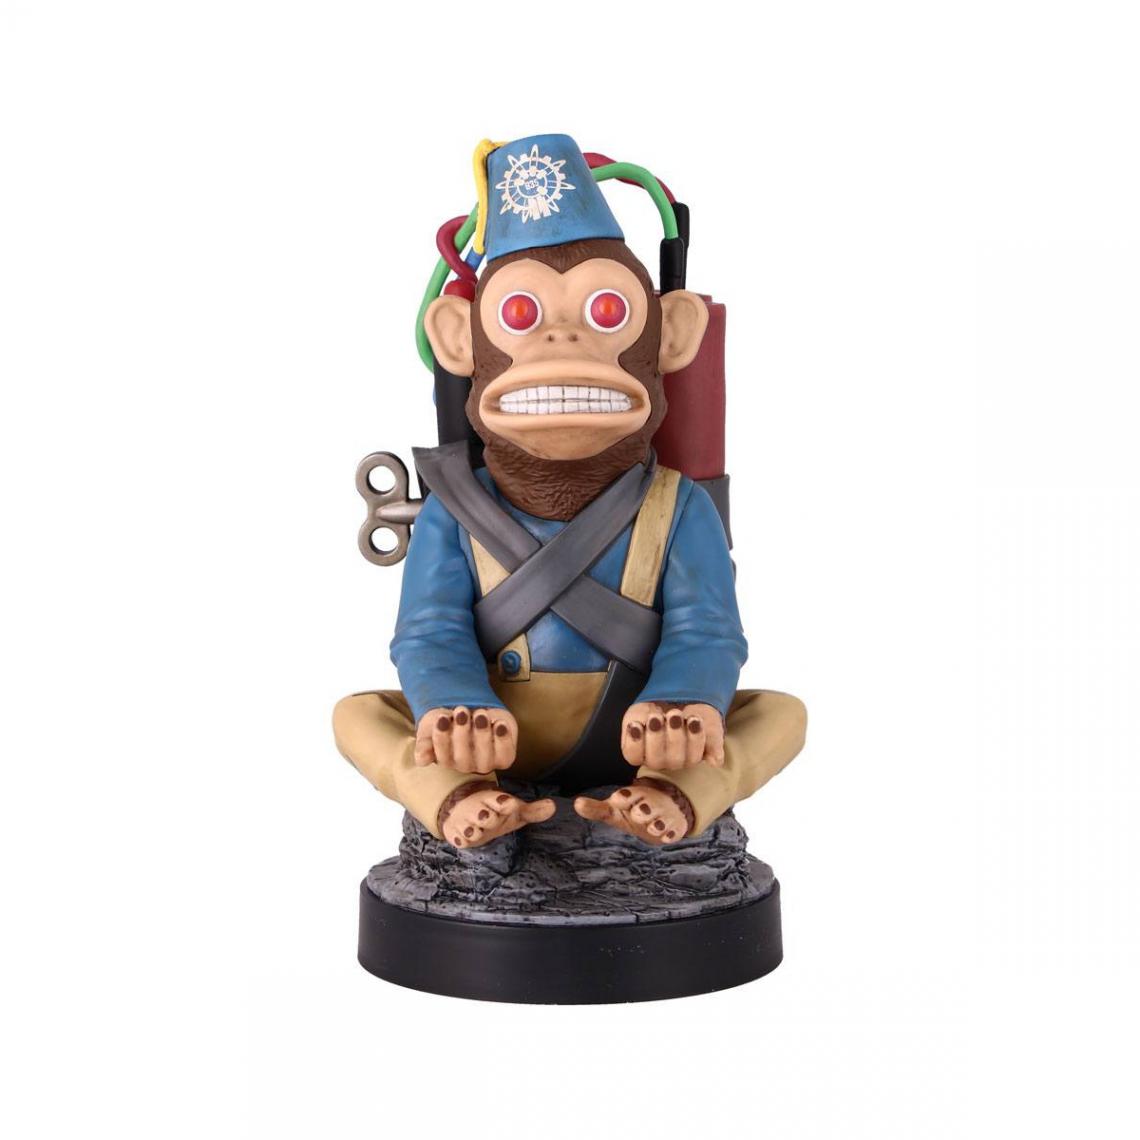 Exquisit - Call of Duty - Figurine Cable Guy Monkey Bomb 20 cm - Mangas